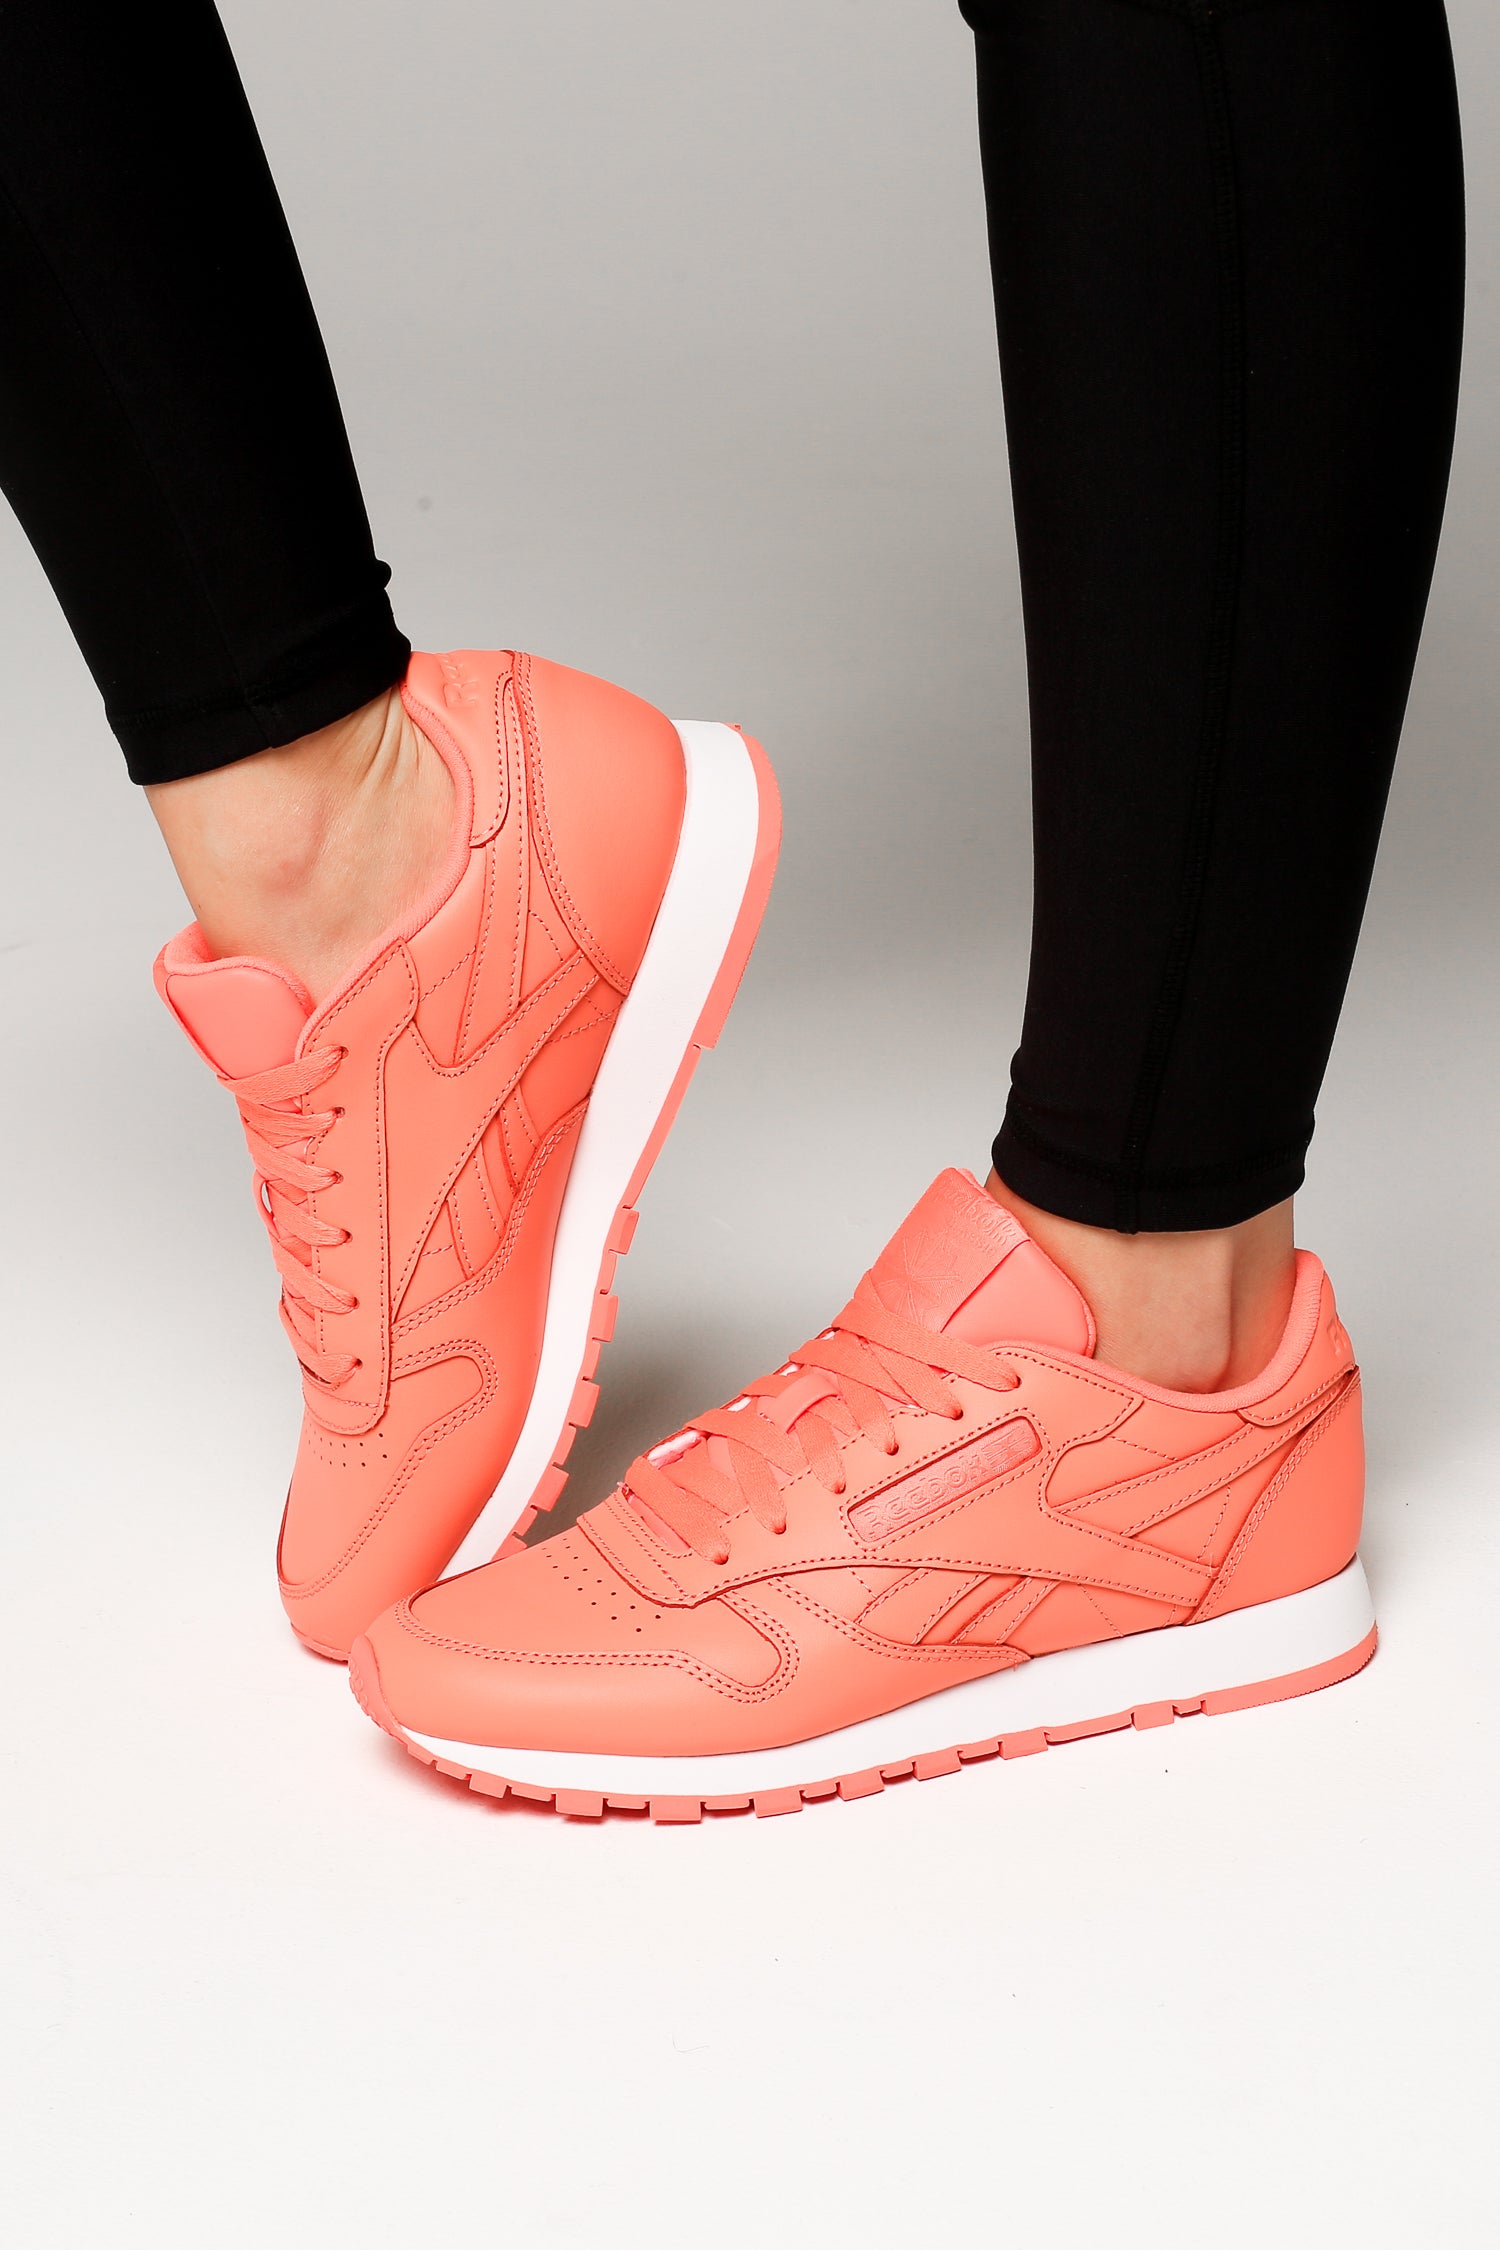 reebok classic leather coral pink